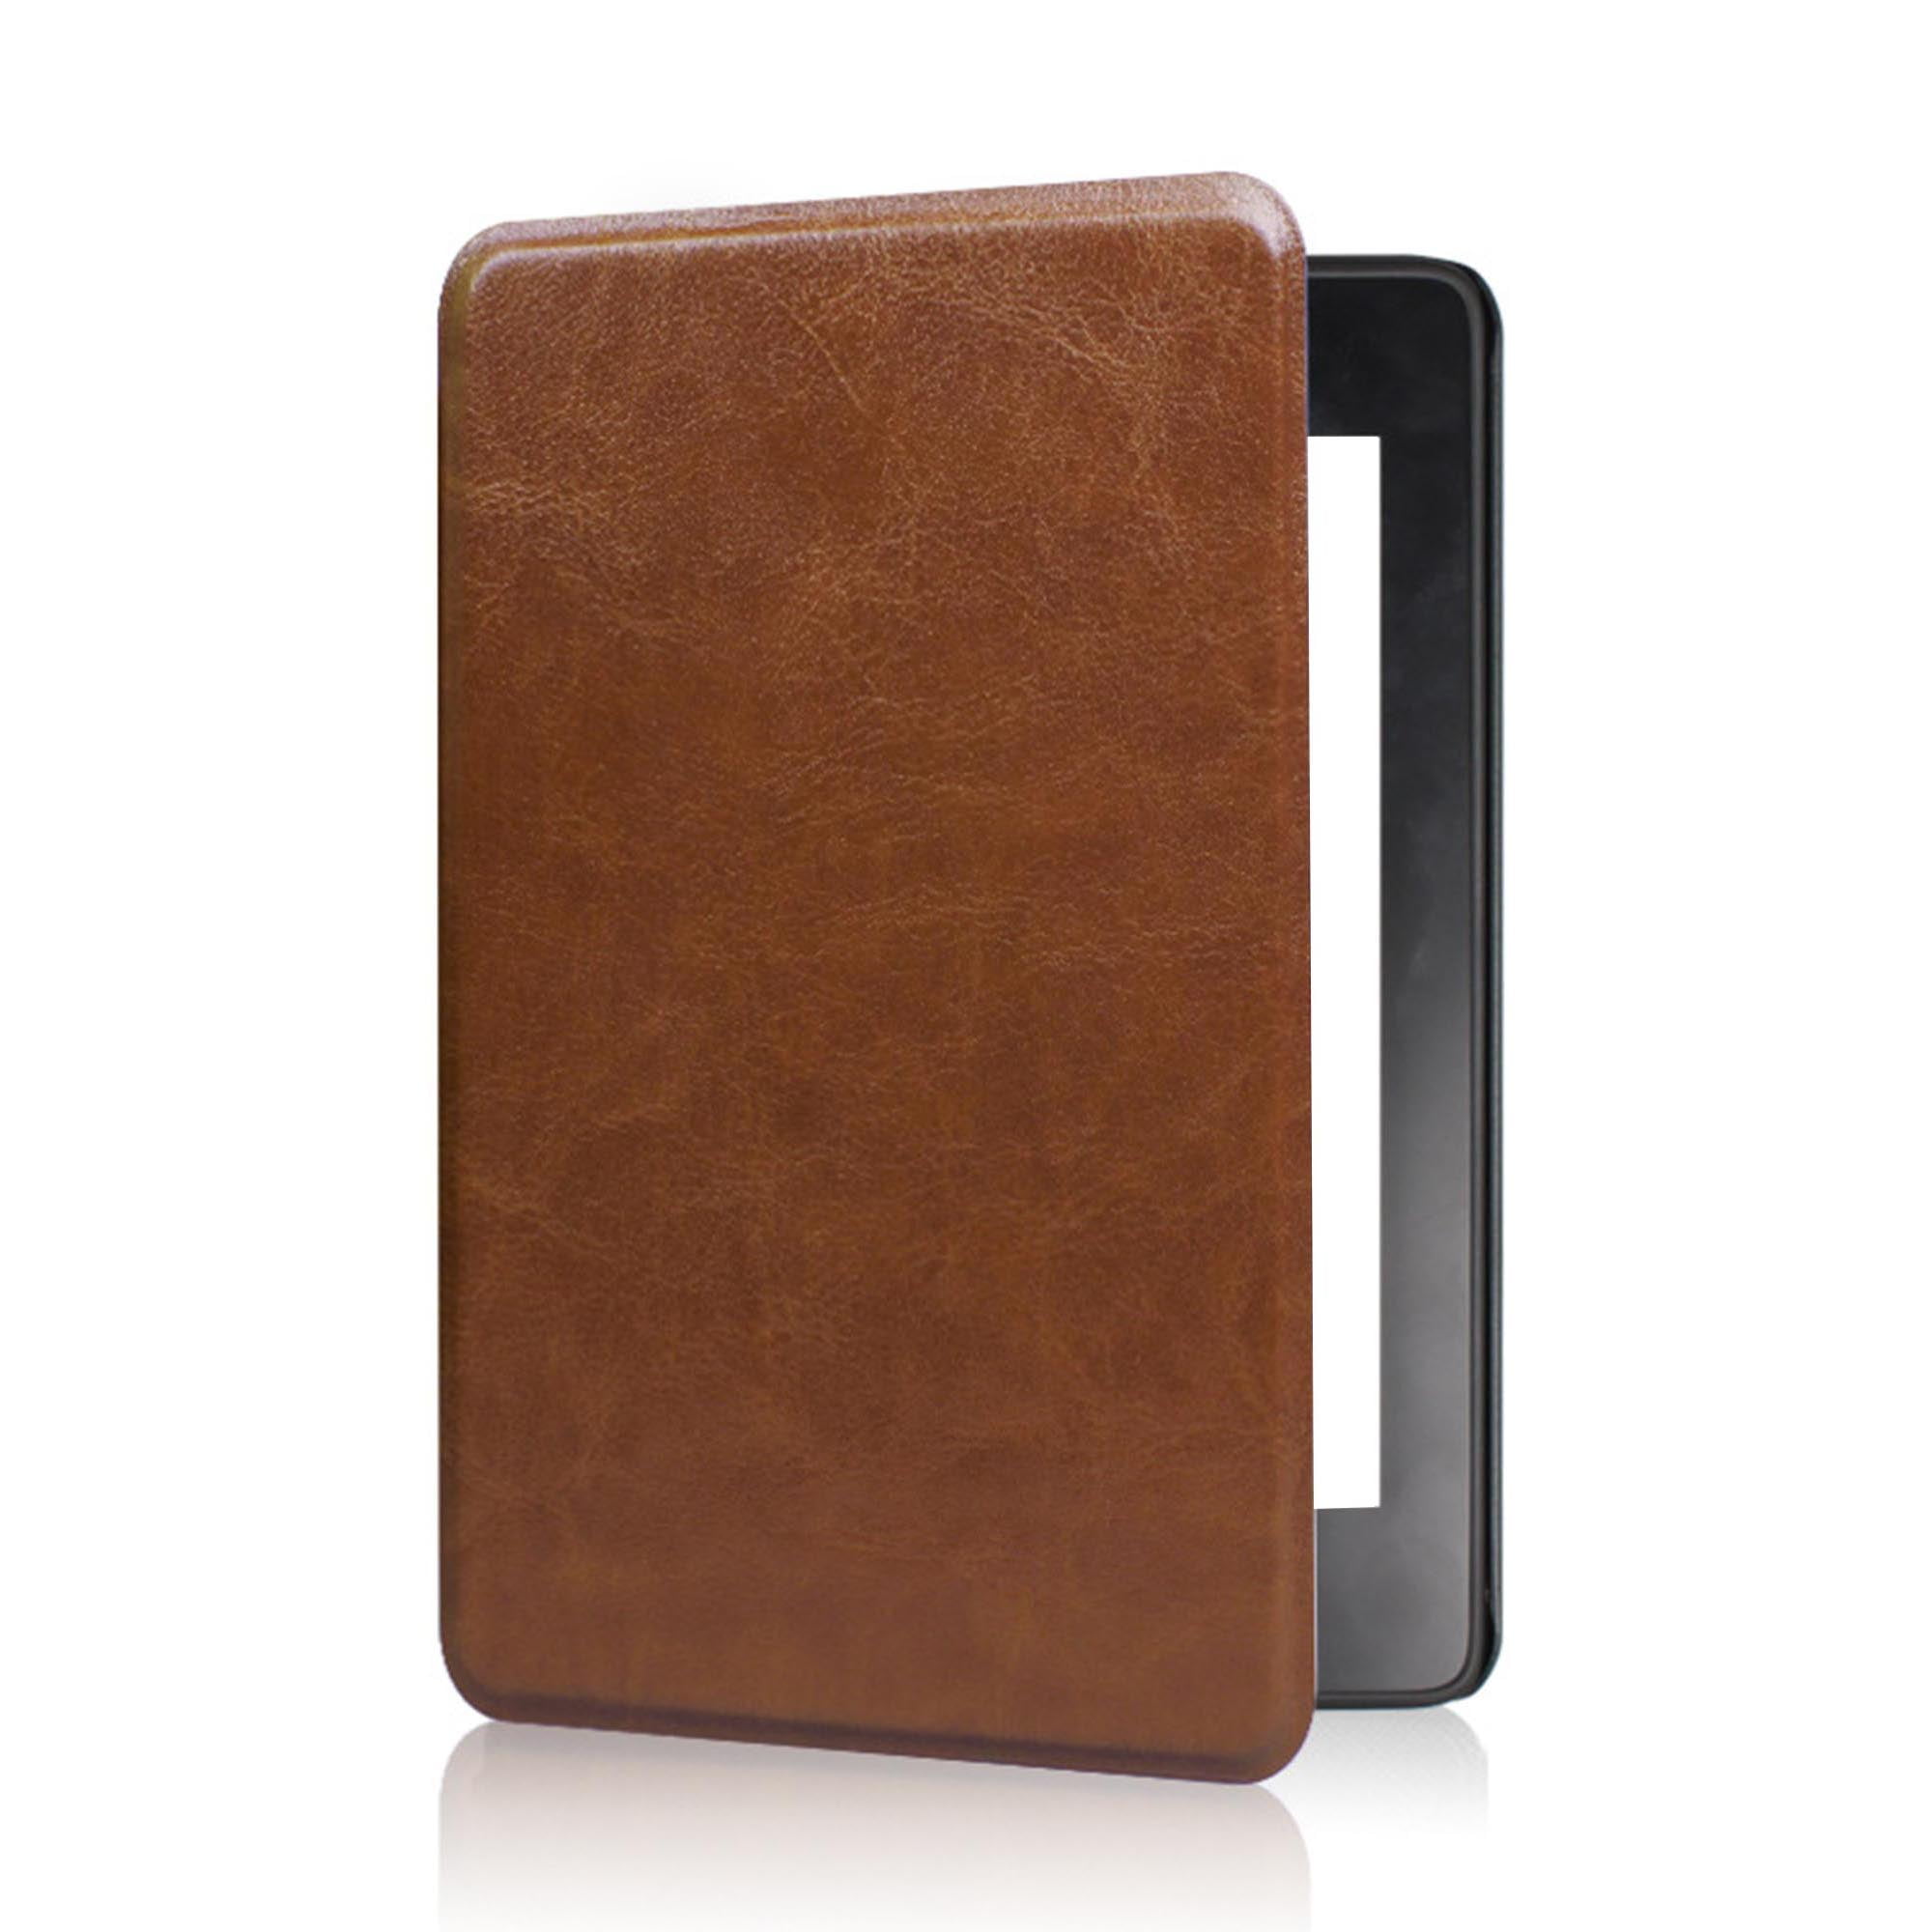 Olixar Leather-Style Rose Gold Case - For Kindle Paperwhite 4 10th Gen 2018